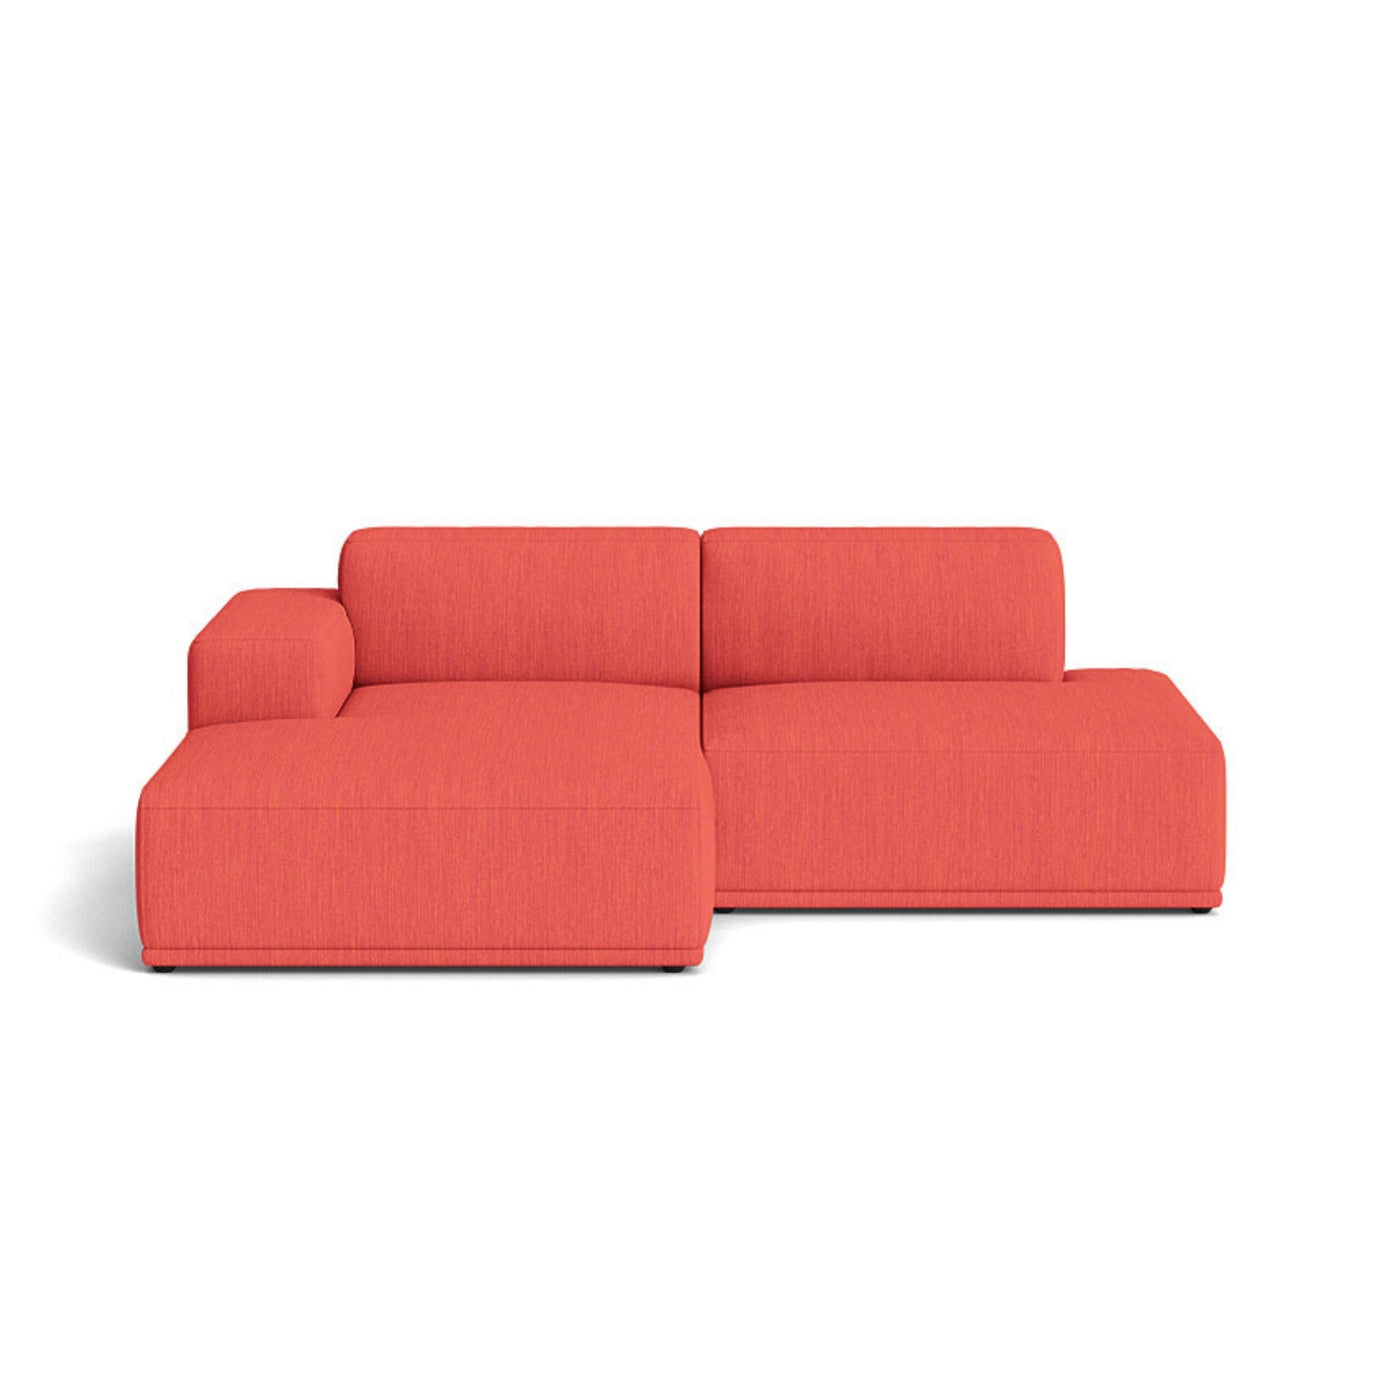 Muuto Connect Soft Modular 2 Seater Sofa, configuration 3. made-to-order from someday designs. #colour_balder-562